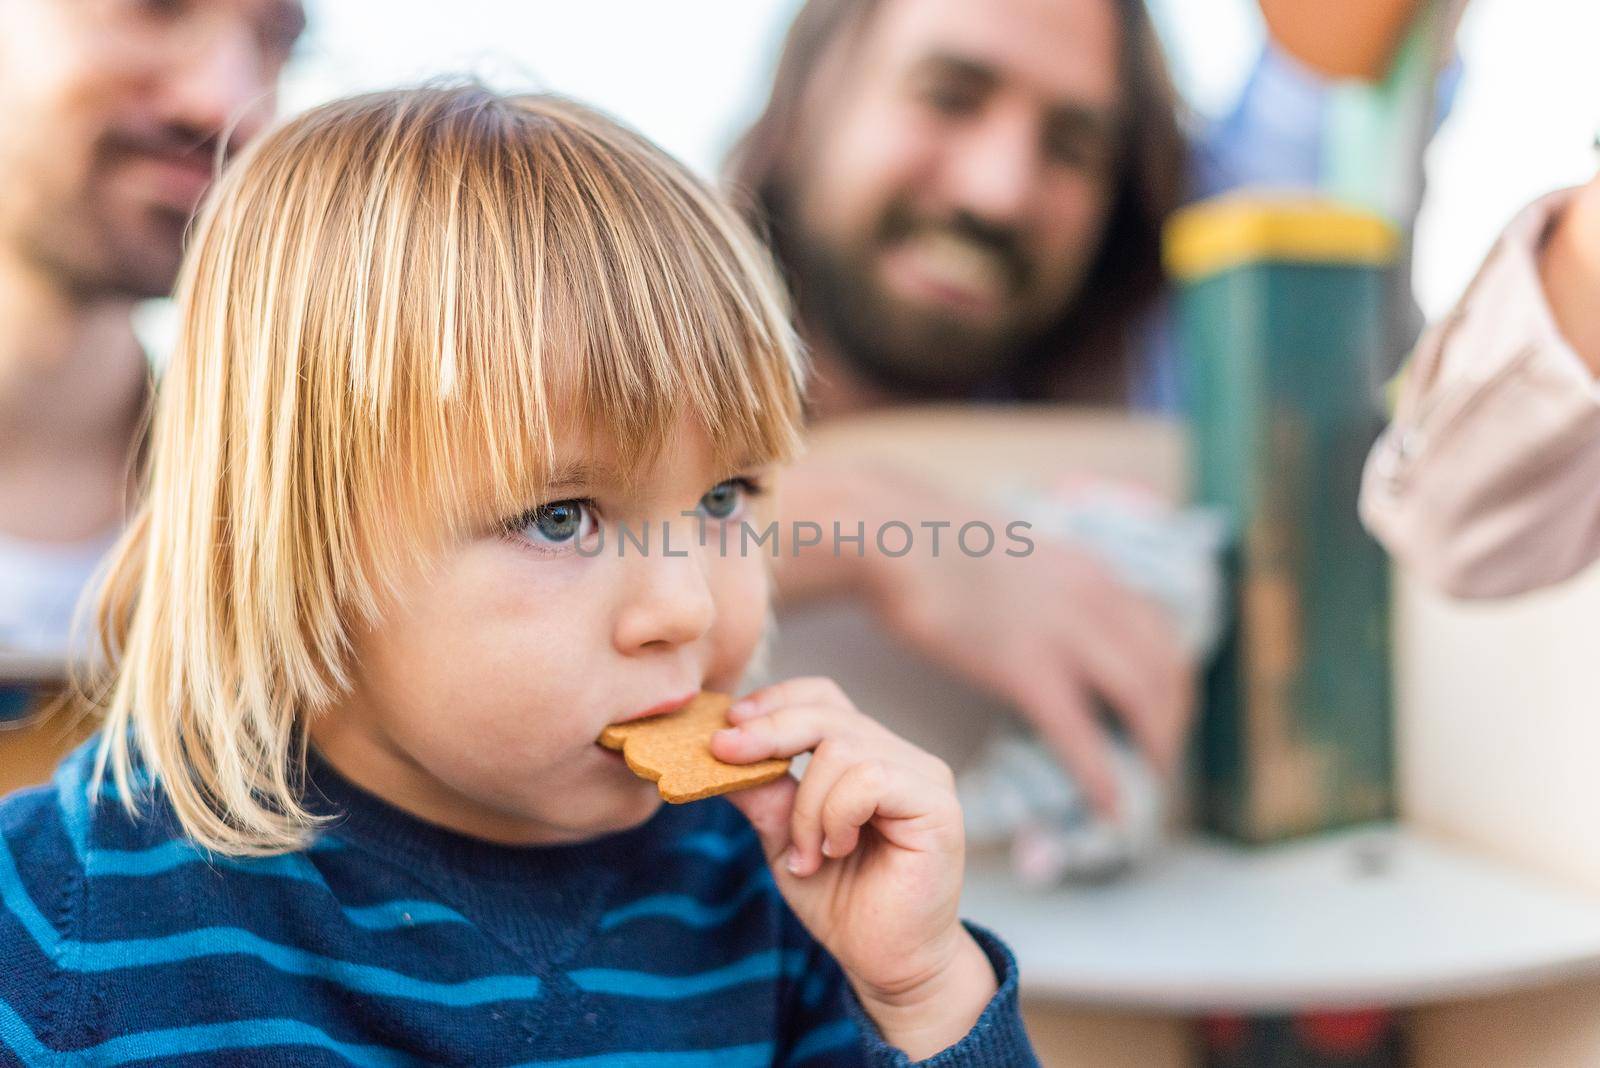 Close up view of a little boy eating a cookie with his family in blurry background